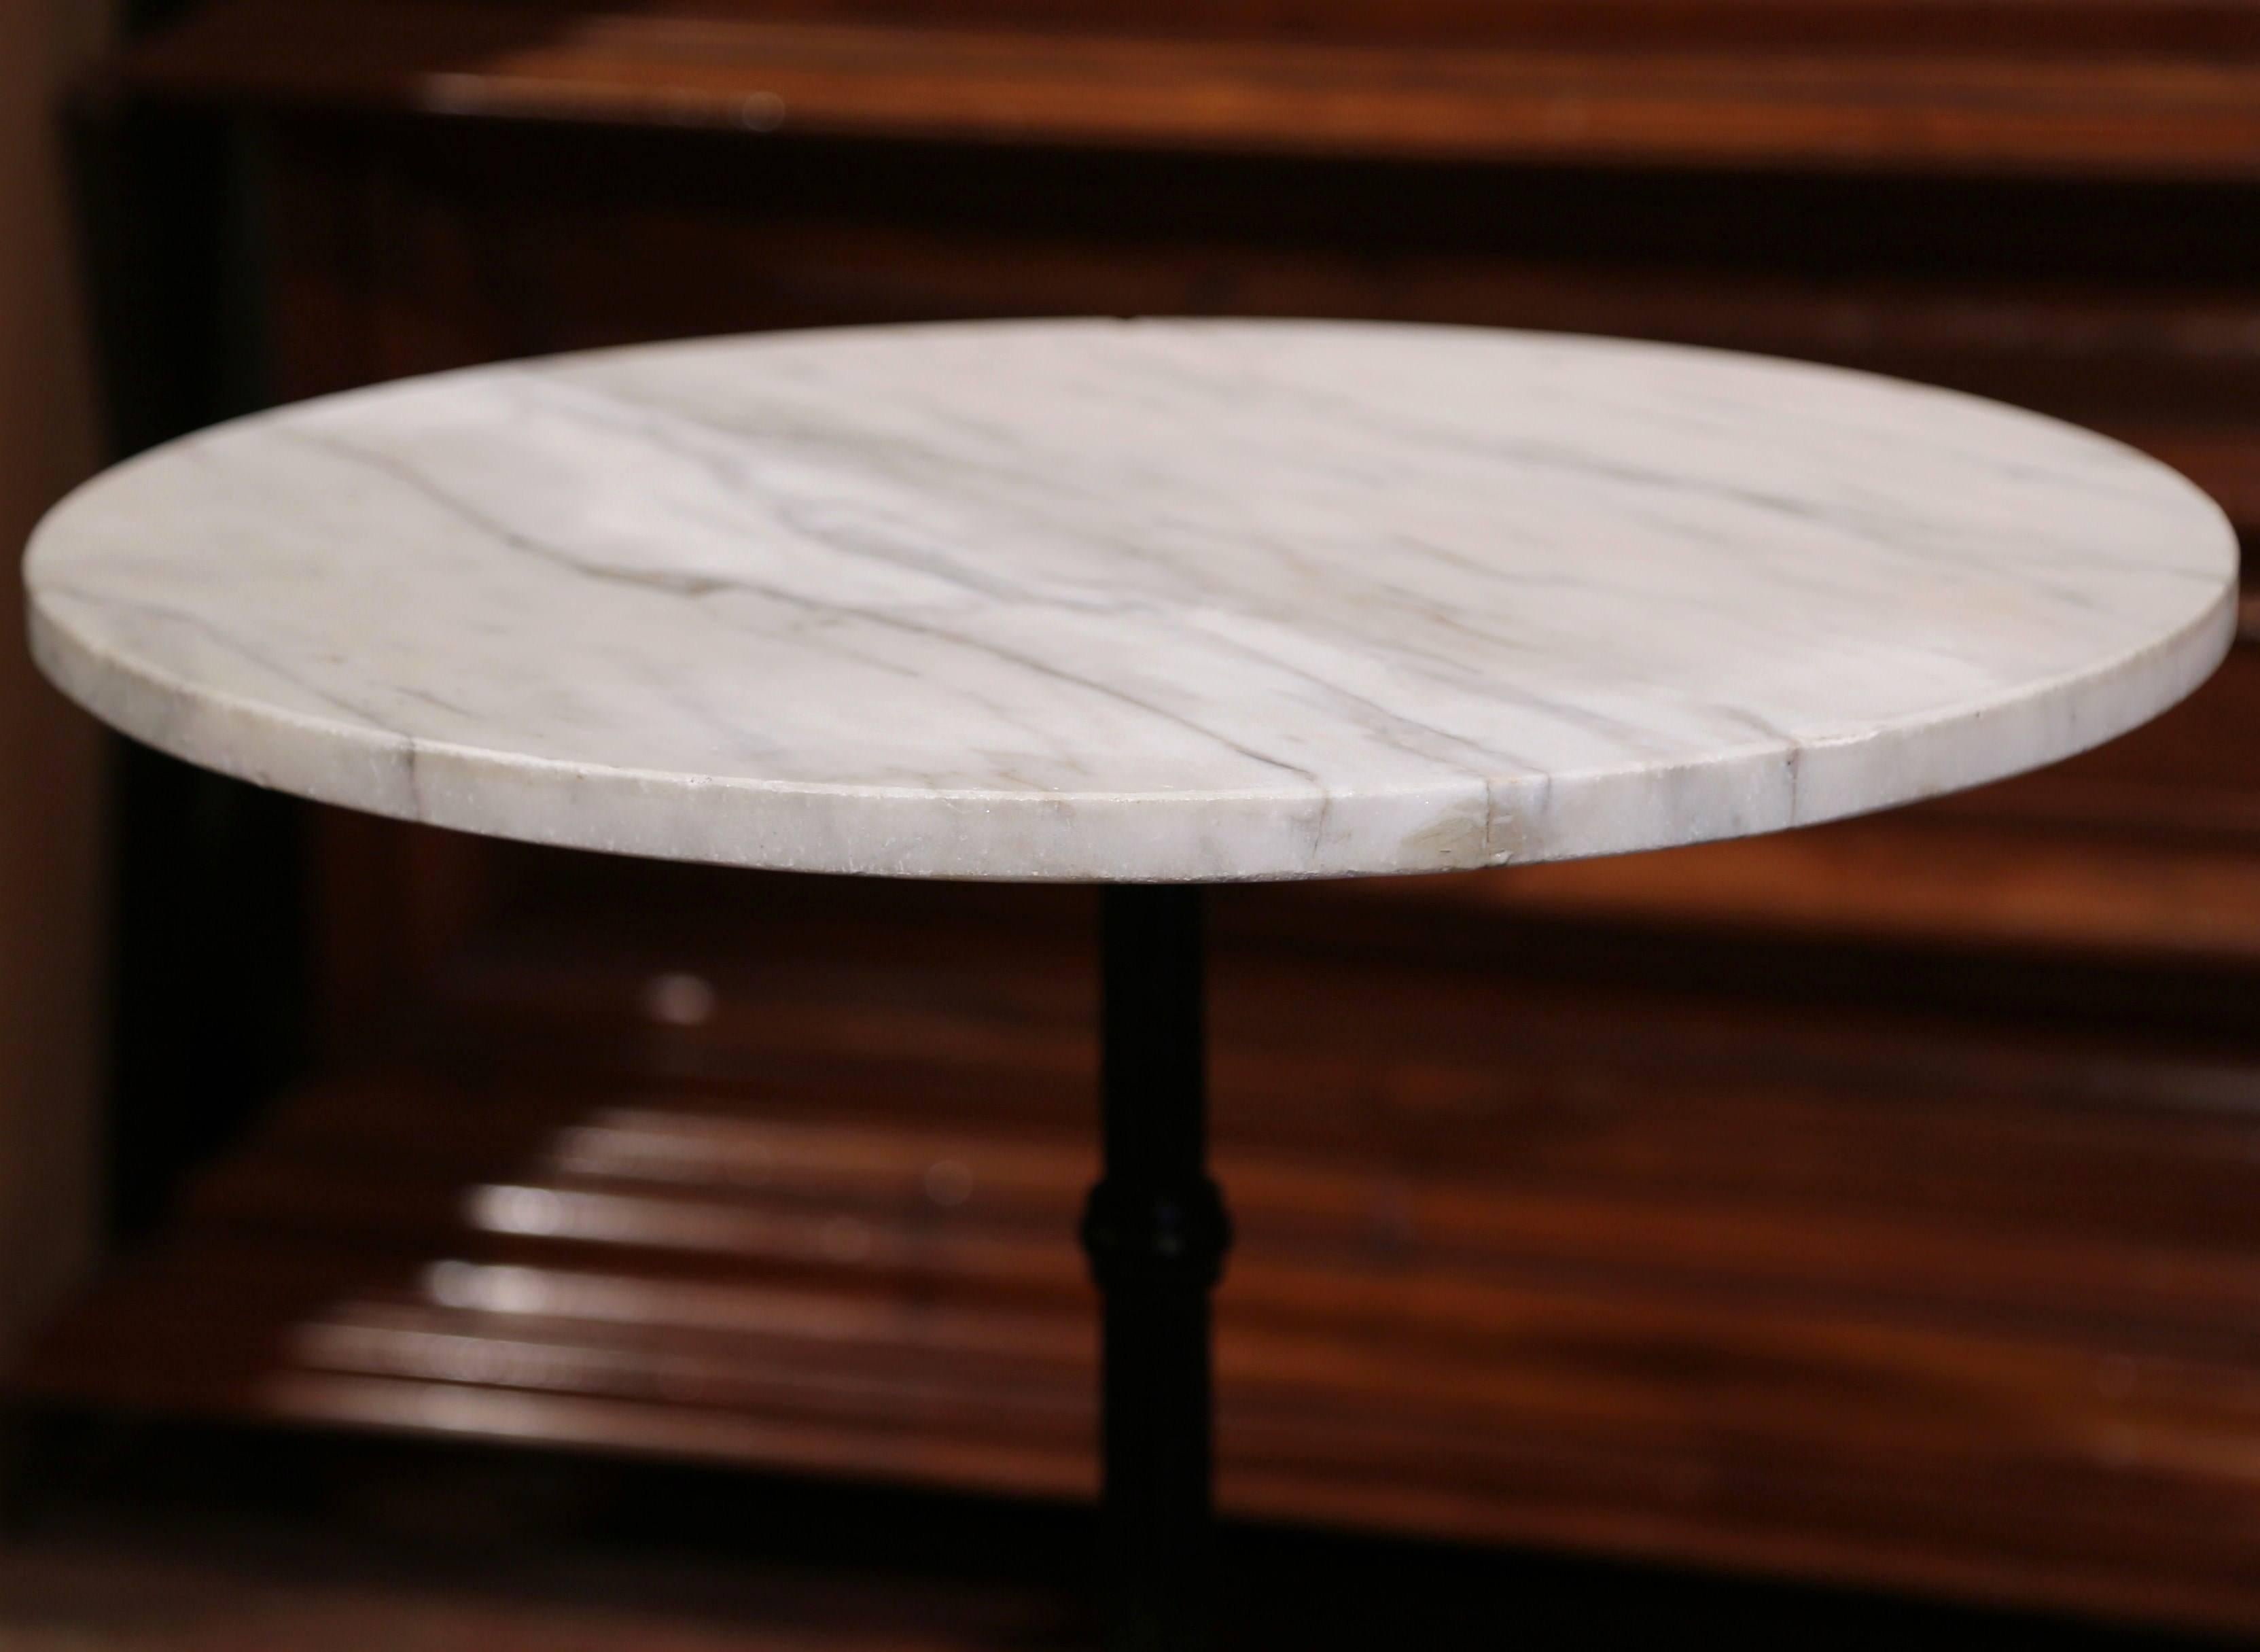 Hand-Crafted 19th Century Parisian Iron and Marble Bistrot Table with Original Paint Finish